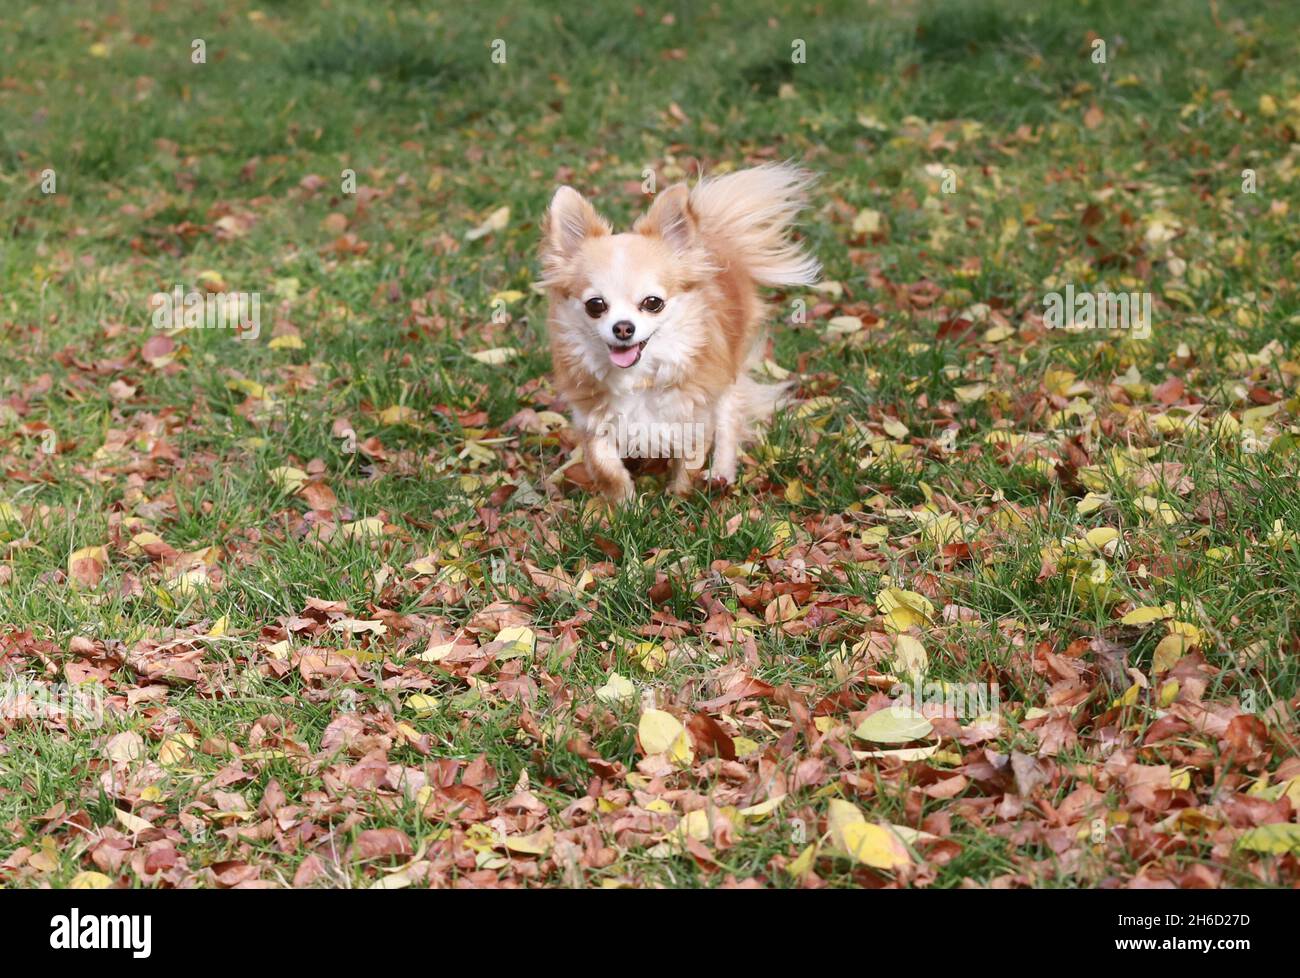 Long haired Chihuahua dog runs in autumn leaves outdoor Stock Photo